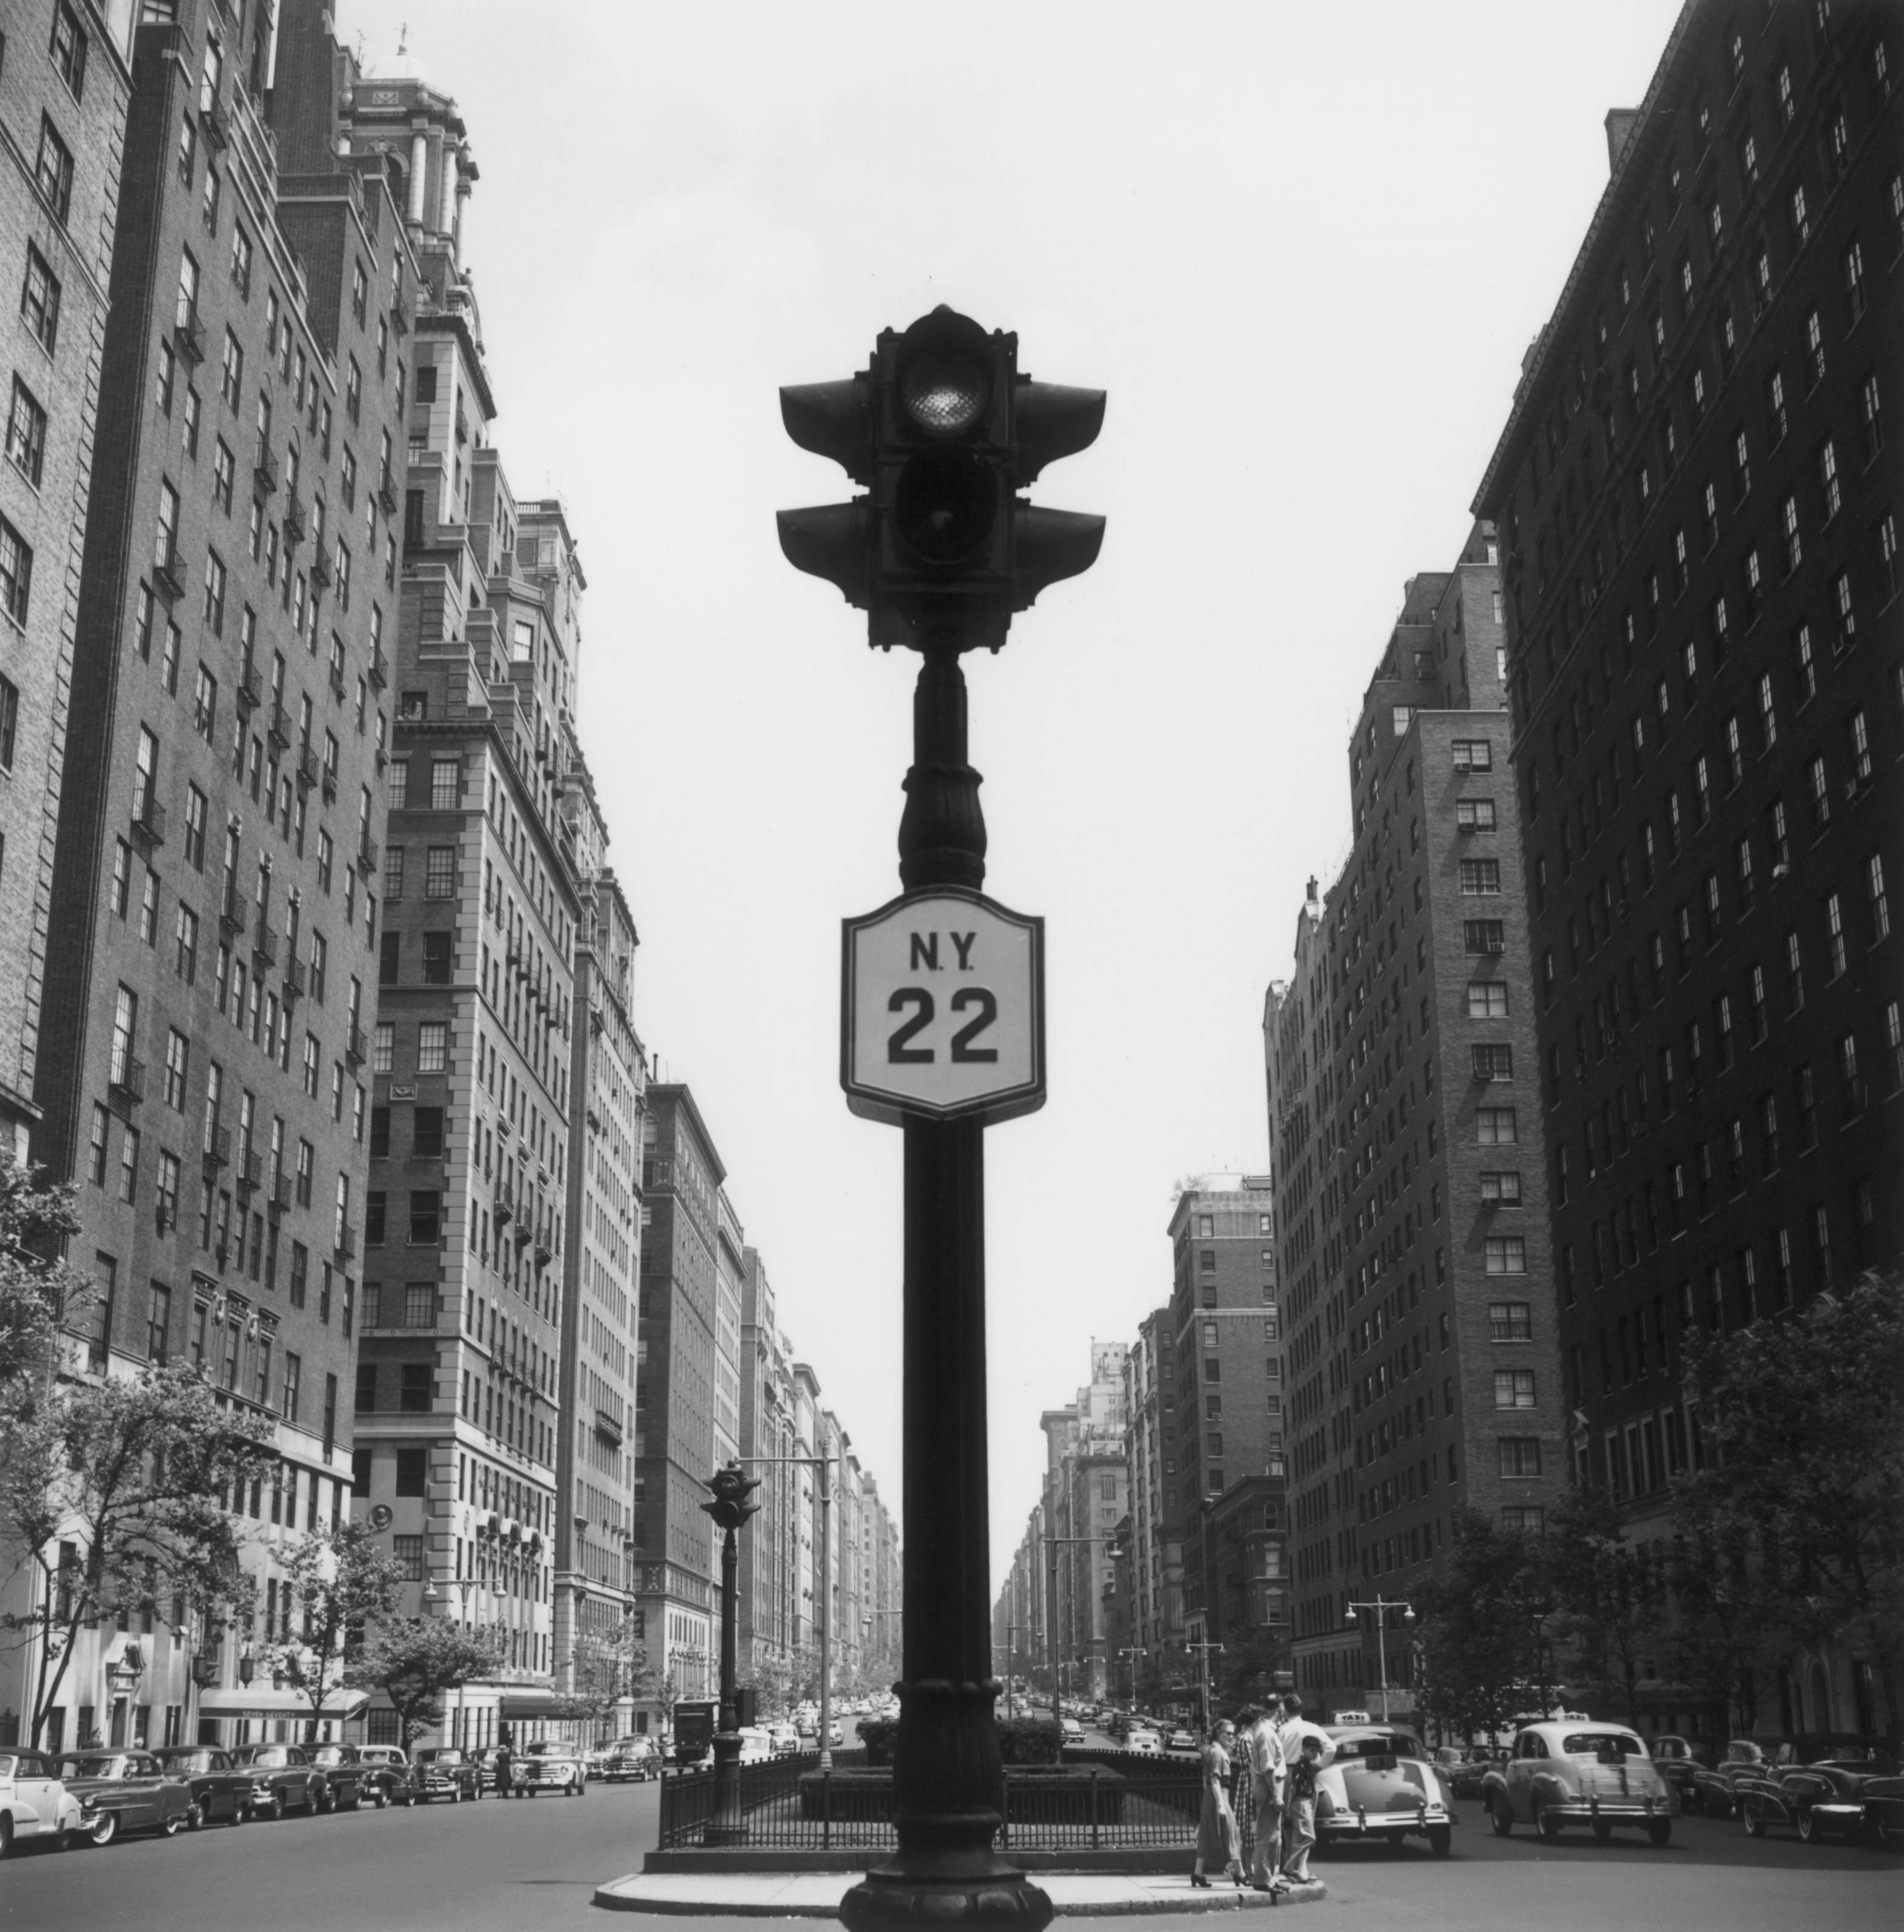 A set of traffic lights on Park Avenue in New York City, 1953. (Photo by Slim Aarons/Getty Images)

Silver gelatin print from the original negative held at the Getty Images Archive, London. Numbered and stamped by The Slim Aarons Estate. 